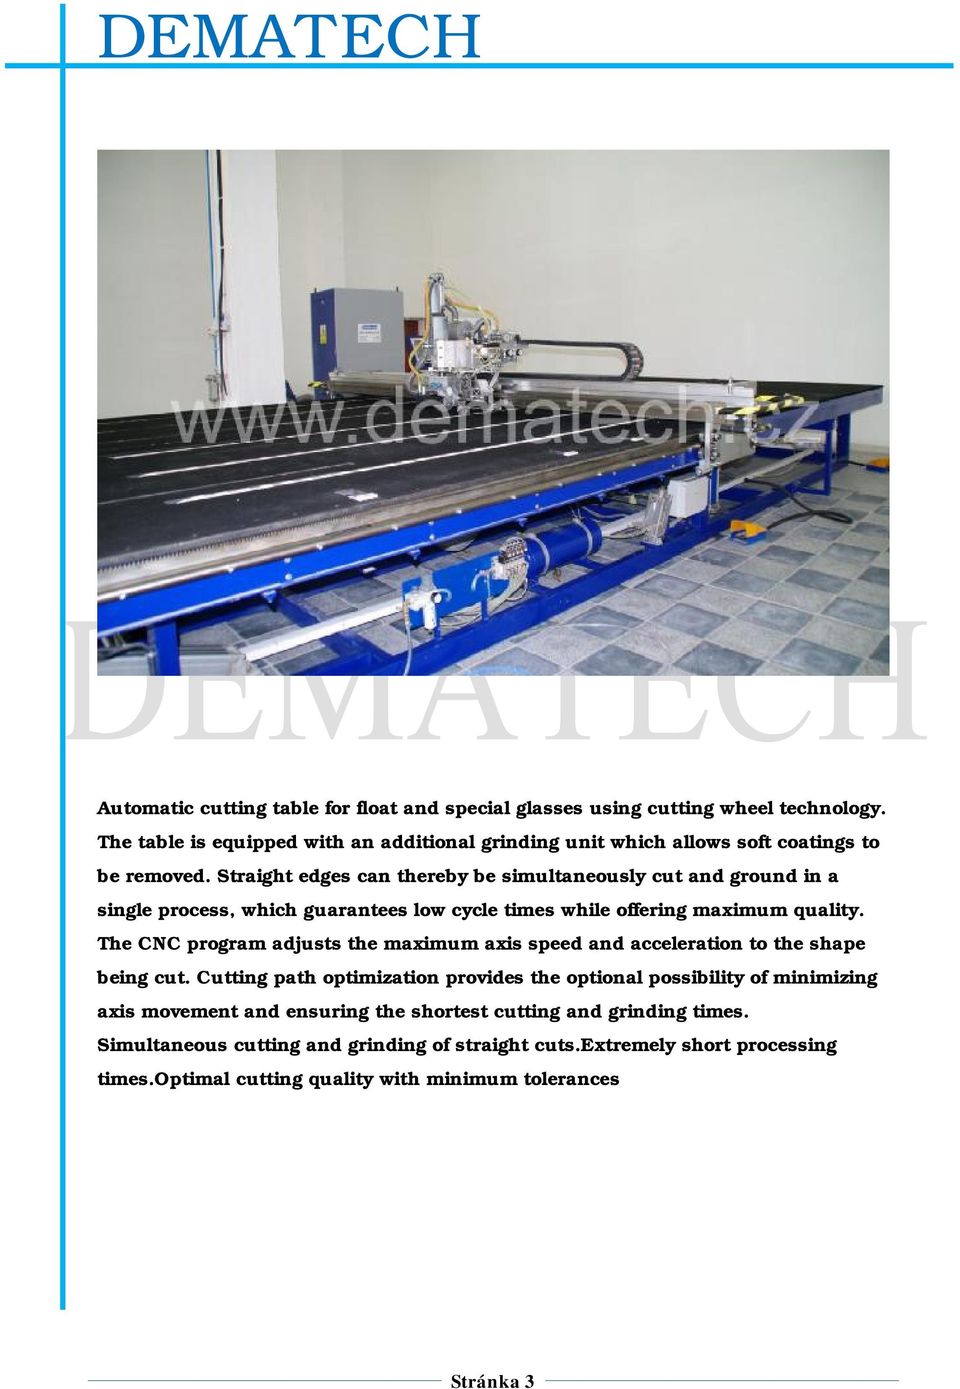 Straight edges can thereby be simultaneously cut and ground in a single process, which guarantees low cycle times while offering maximum quality.